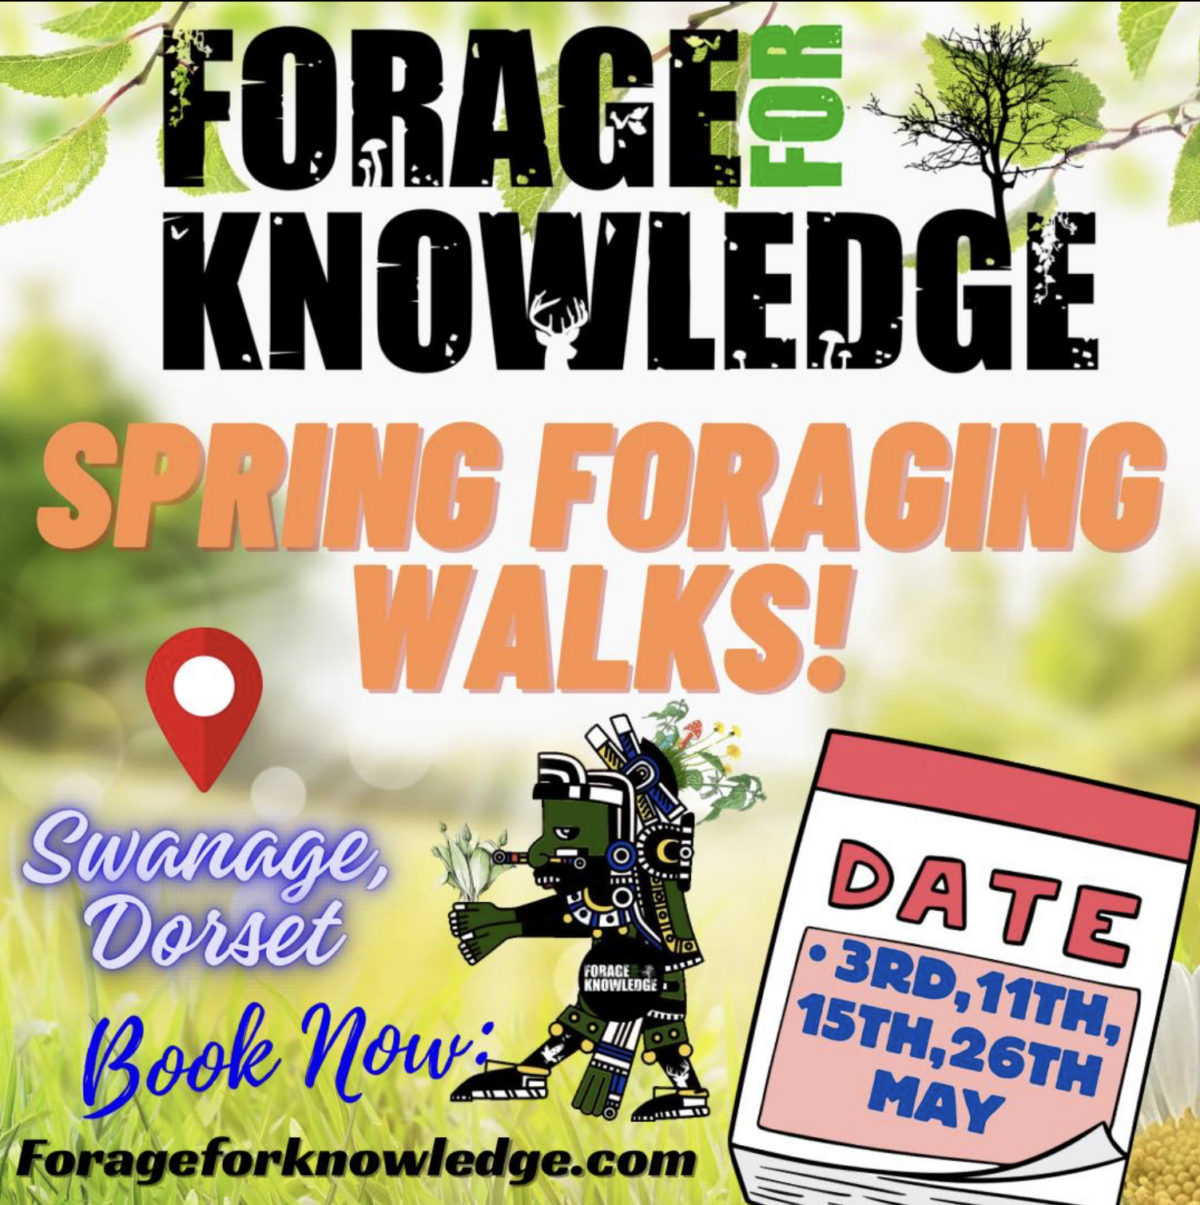 Forage for Knowledge Spring foraging walks poster